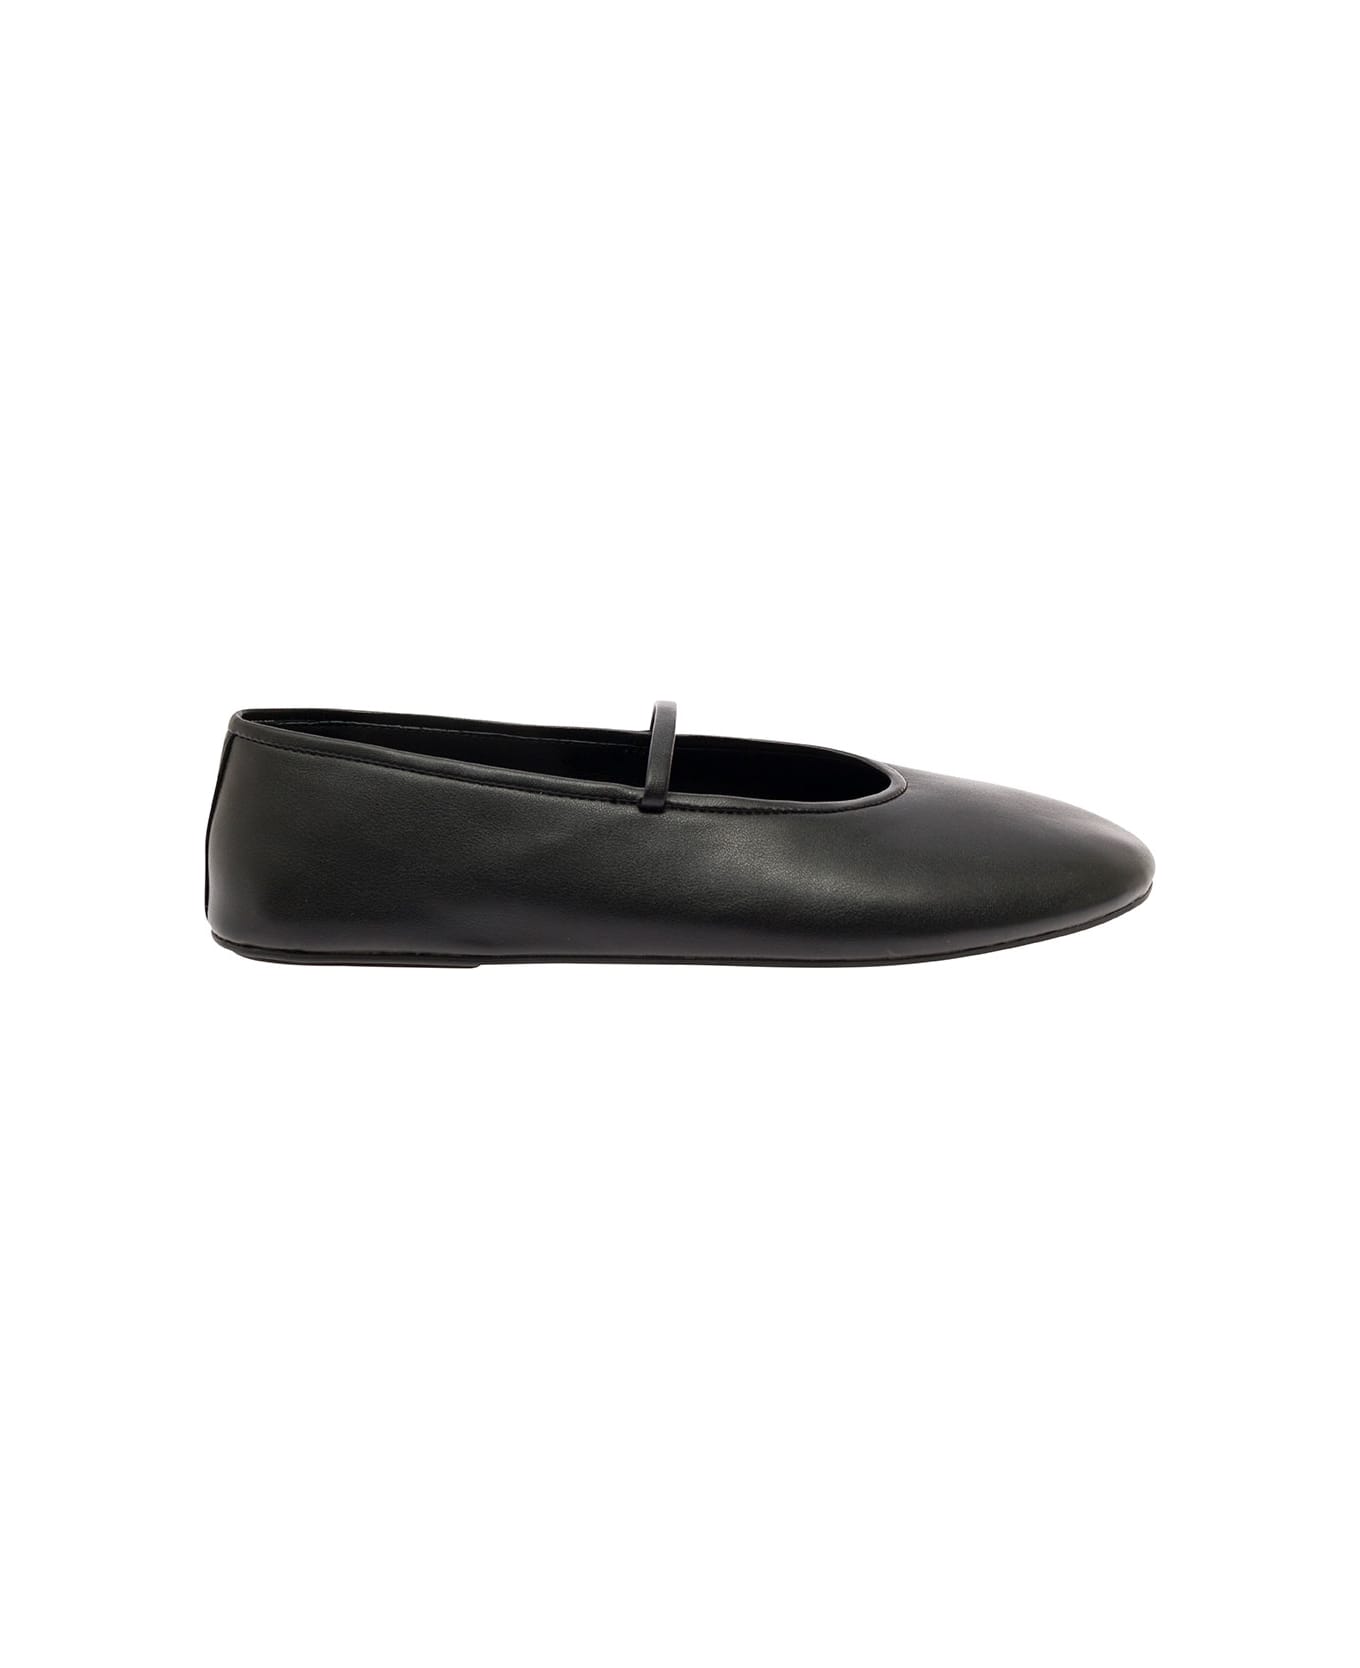 Jeffrey Campbell Black Ballet Flats With Almond Toe In Eco Leather Woman - Black